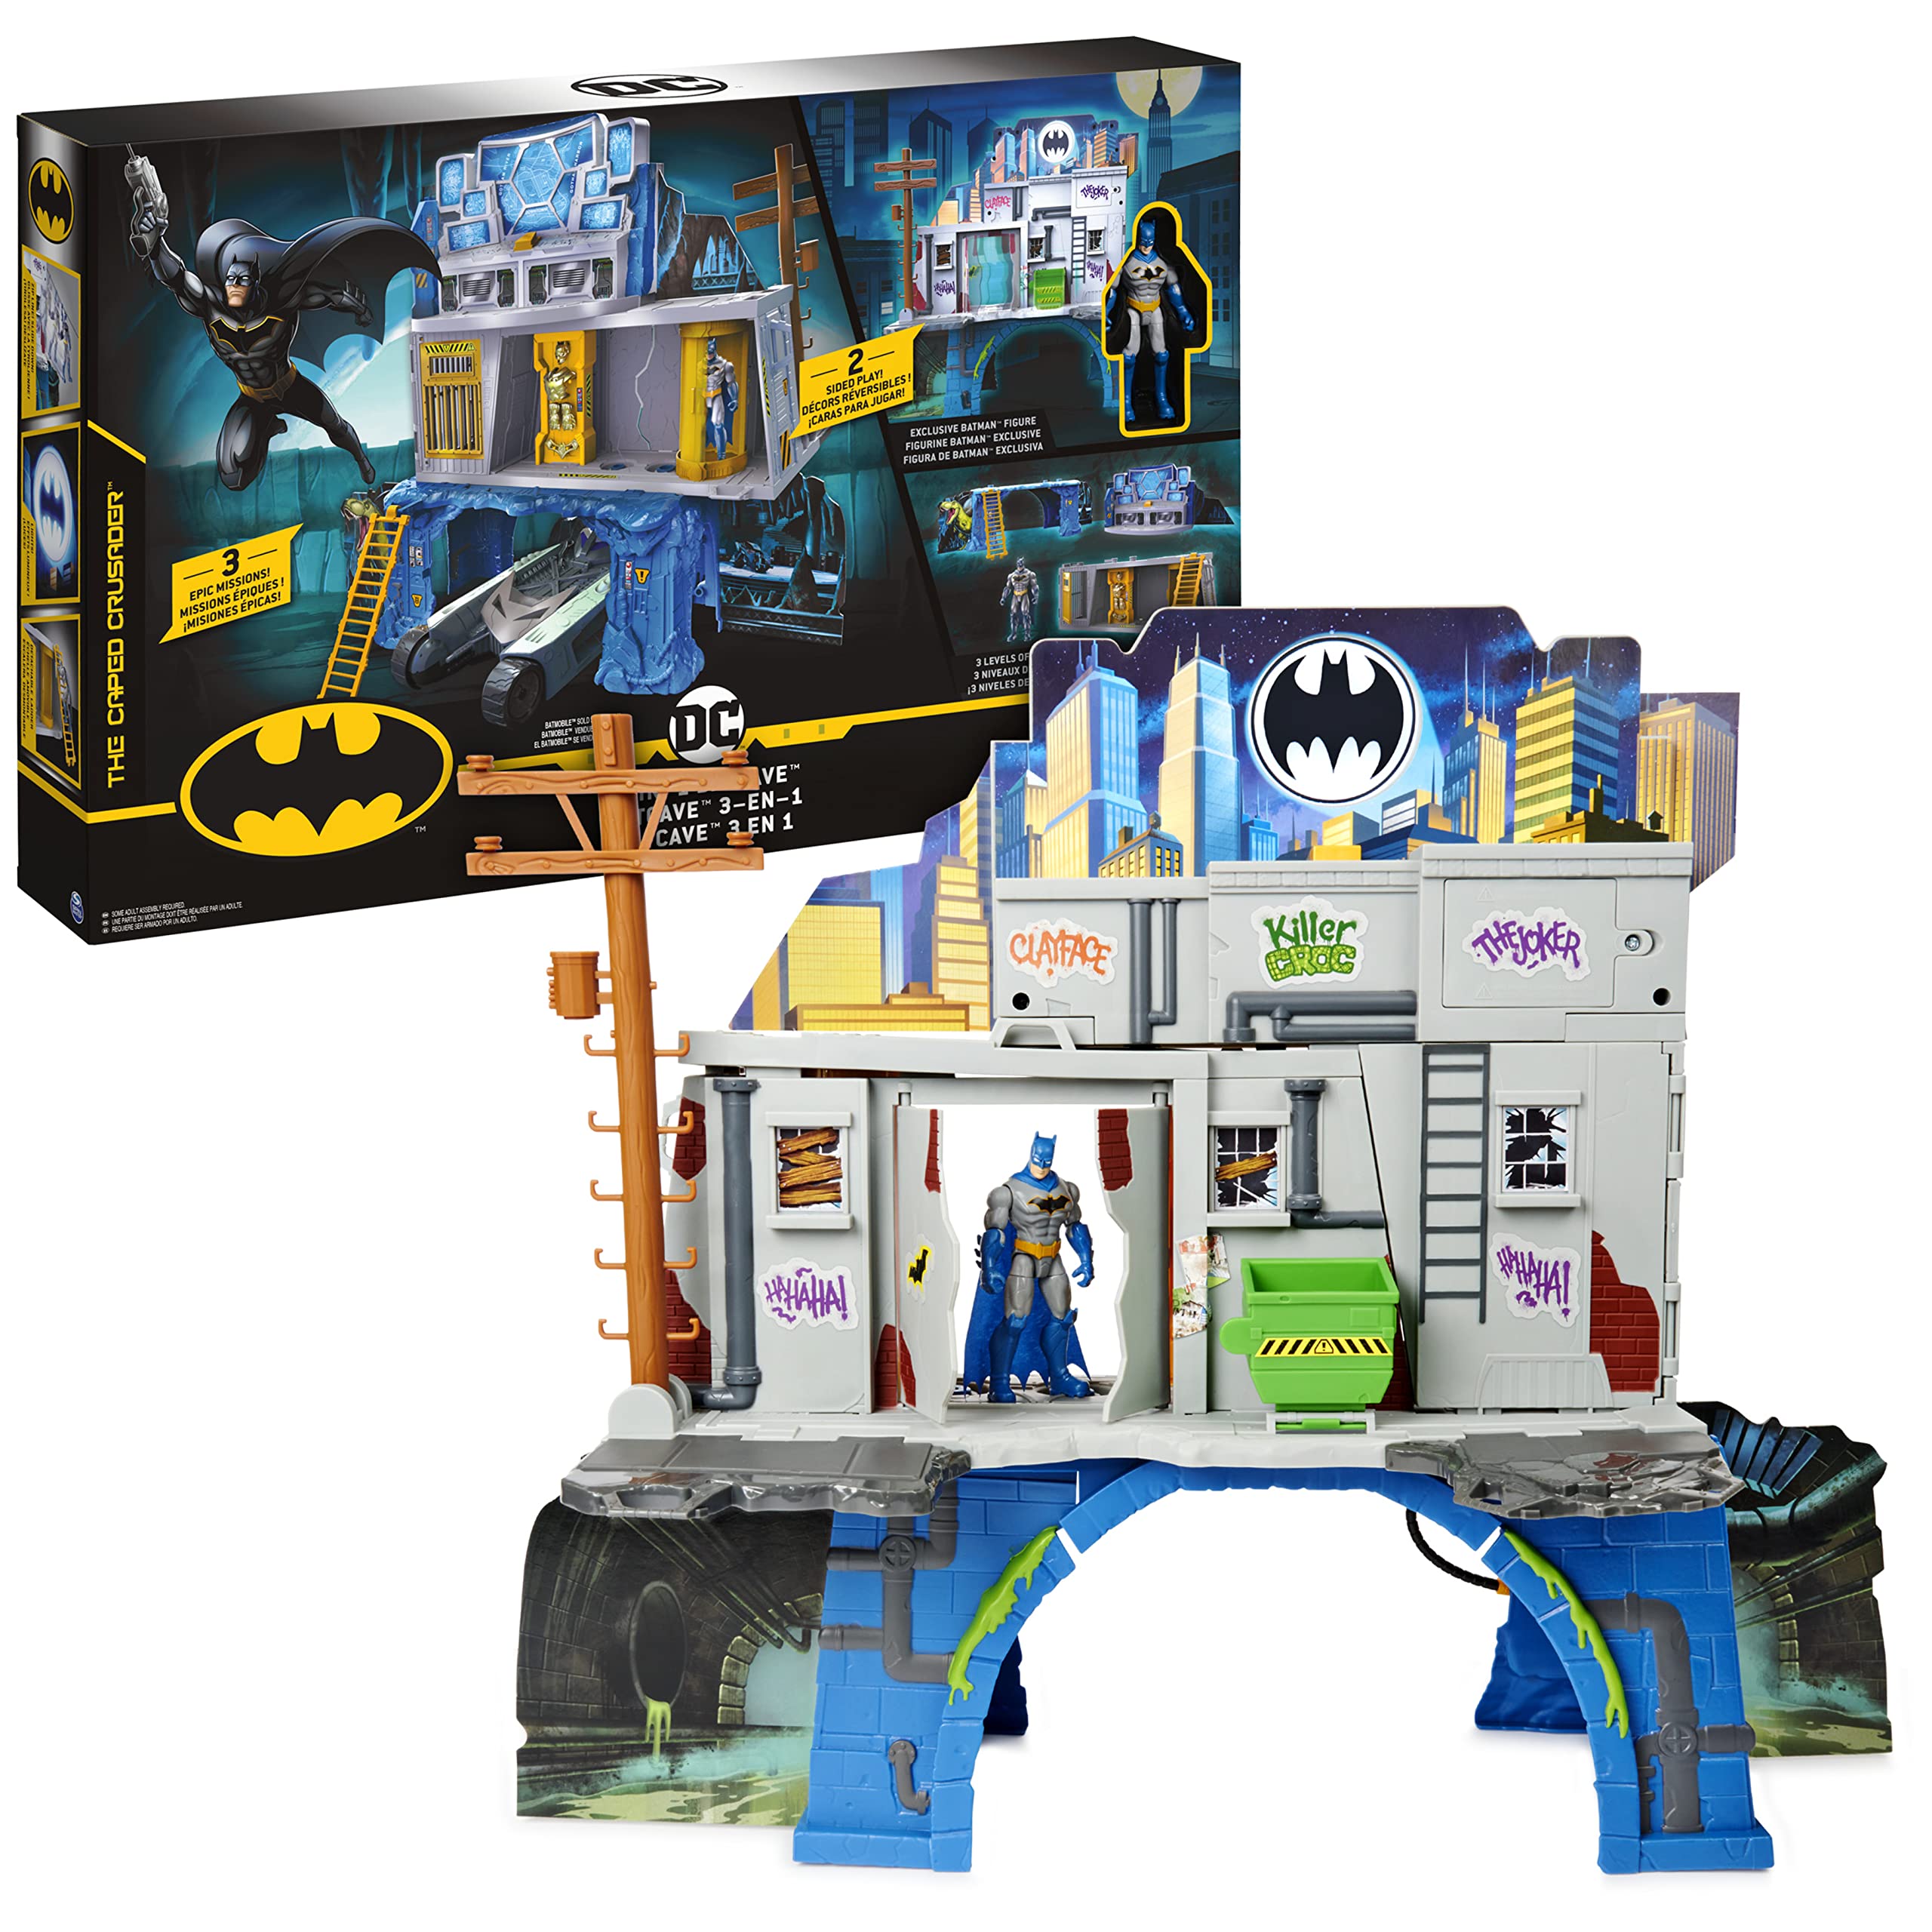 Batman 3-in-1 Batcave Playset with Exclusive 4-inch Batman Action Figure and Battle Armor, Gift Ideas for Your Holiday Toy List 2021